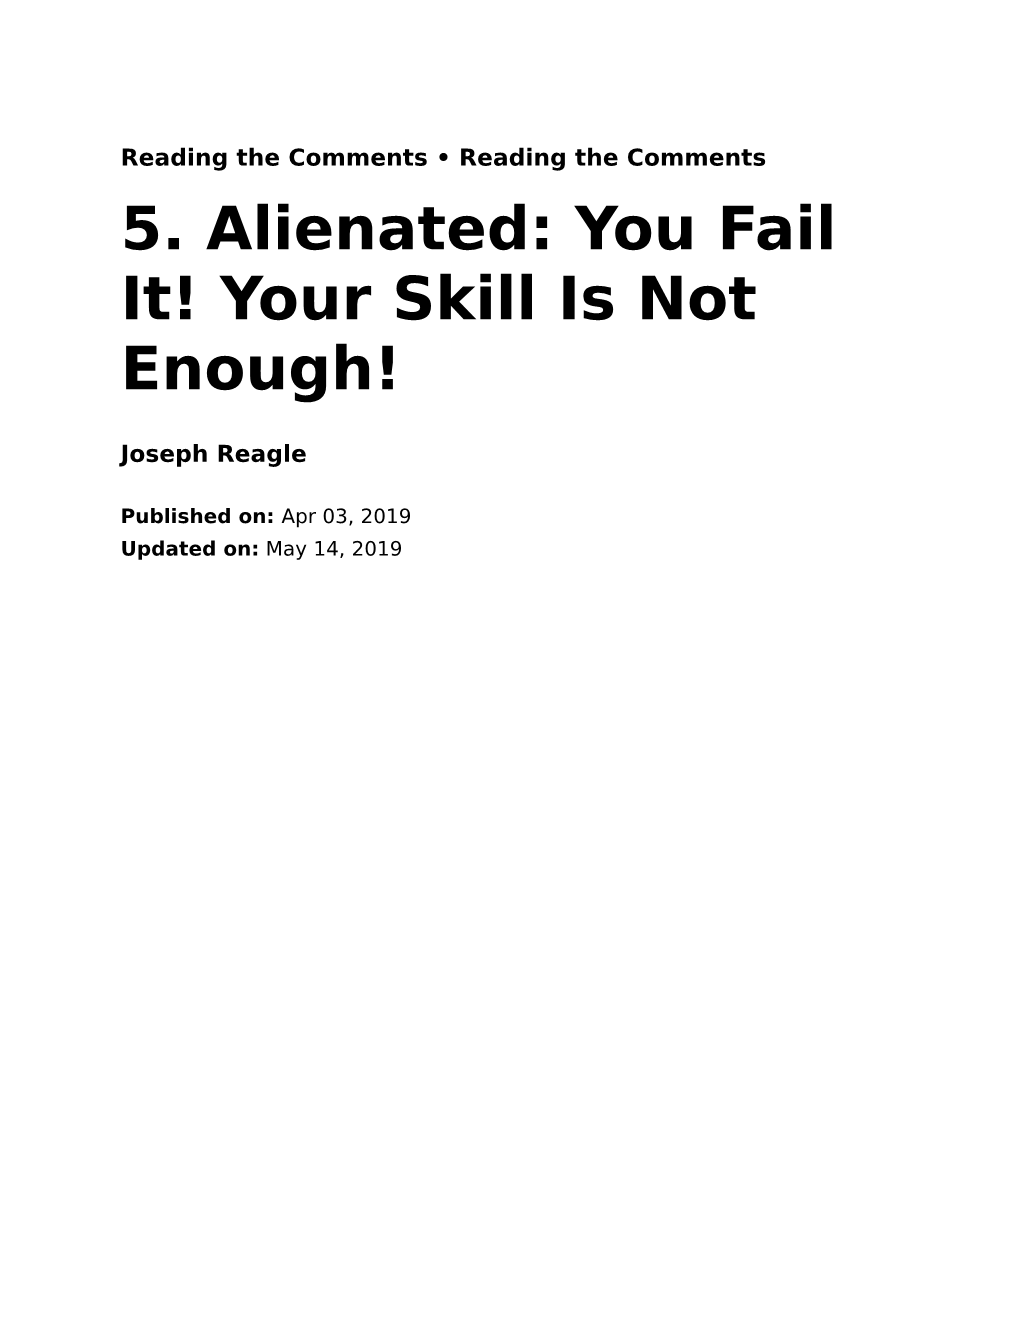 5. Alienated: You Fail It! Your Skill Is Not Enough!